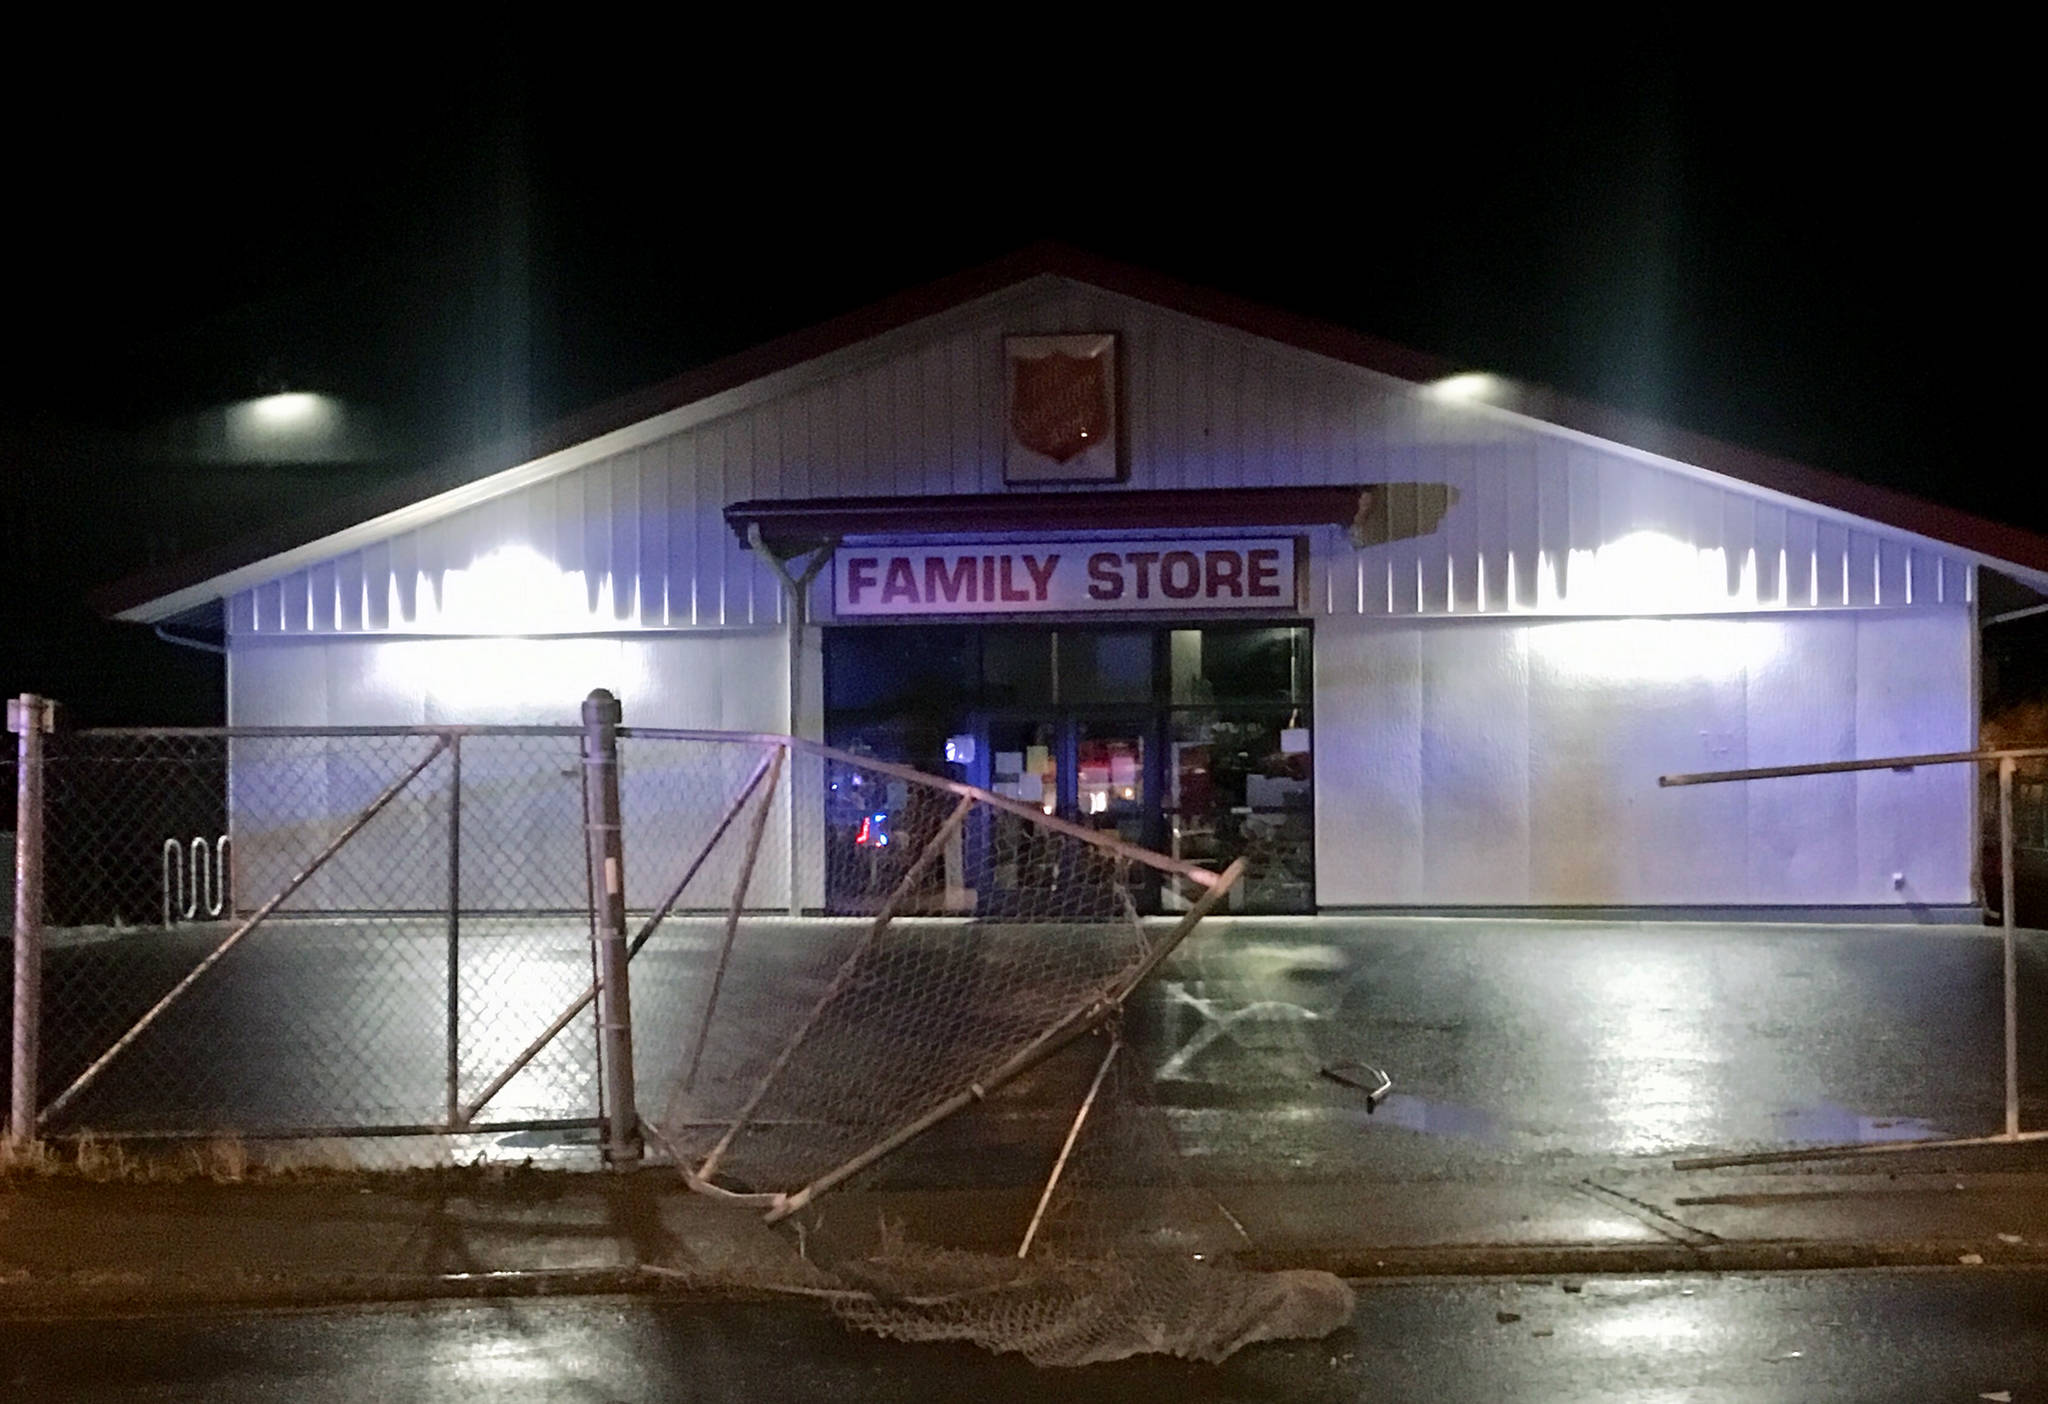 The fence in front of The Salvation Army Family Store on Willoughby Avenue was damaged by a drunken driver Wednesday night, police said. (Michael S. Lockett | Juneau Empire)